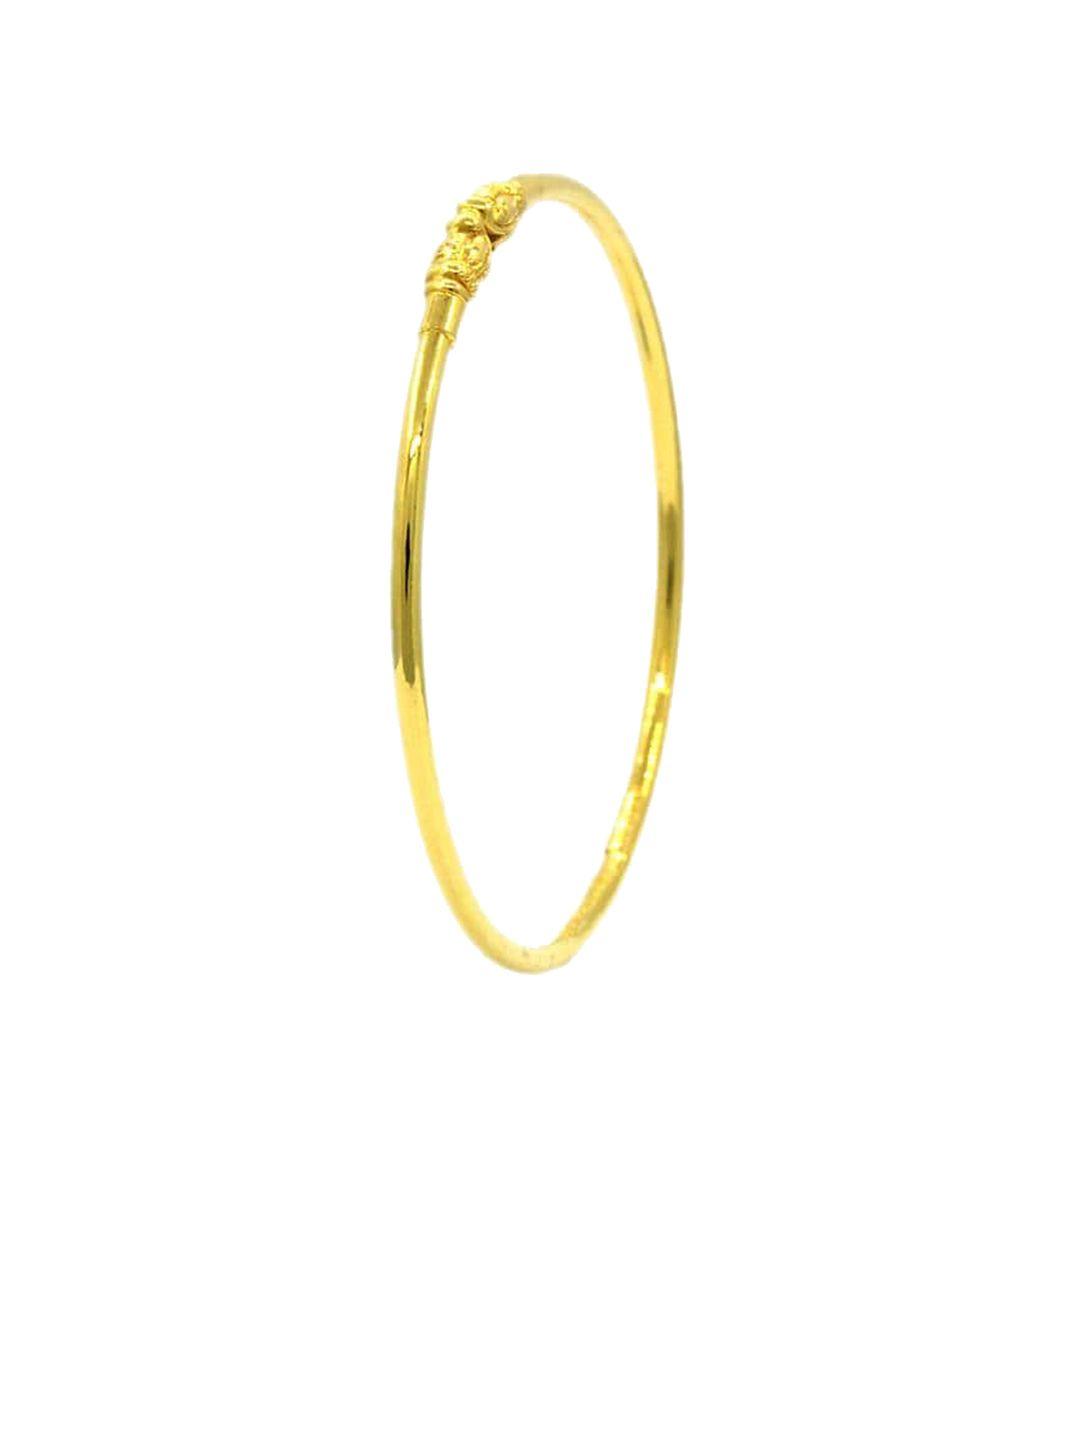 candere a kalyan jewellers company 22kt yellow gold copper bangle